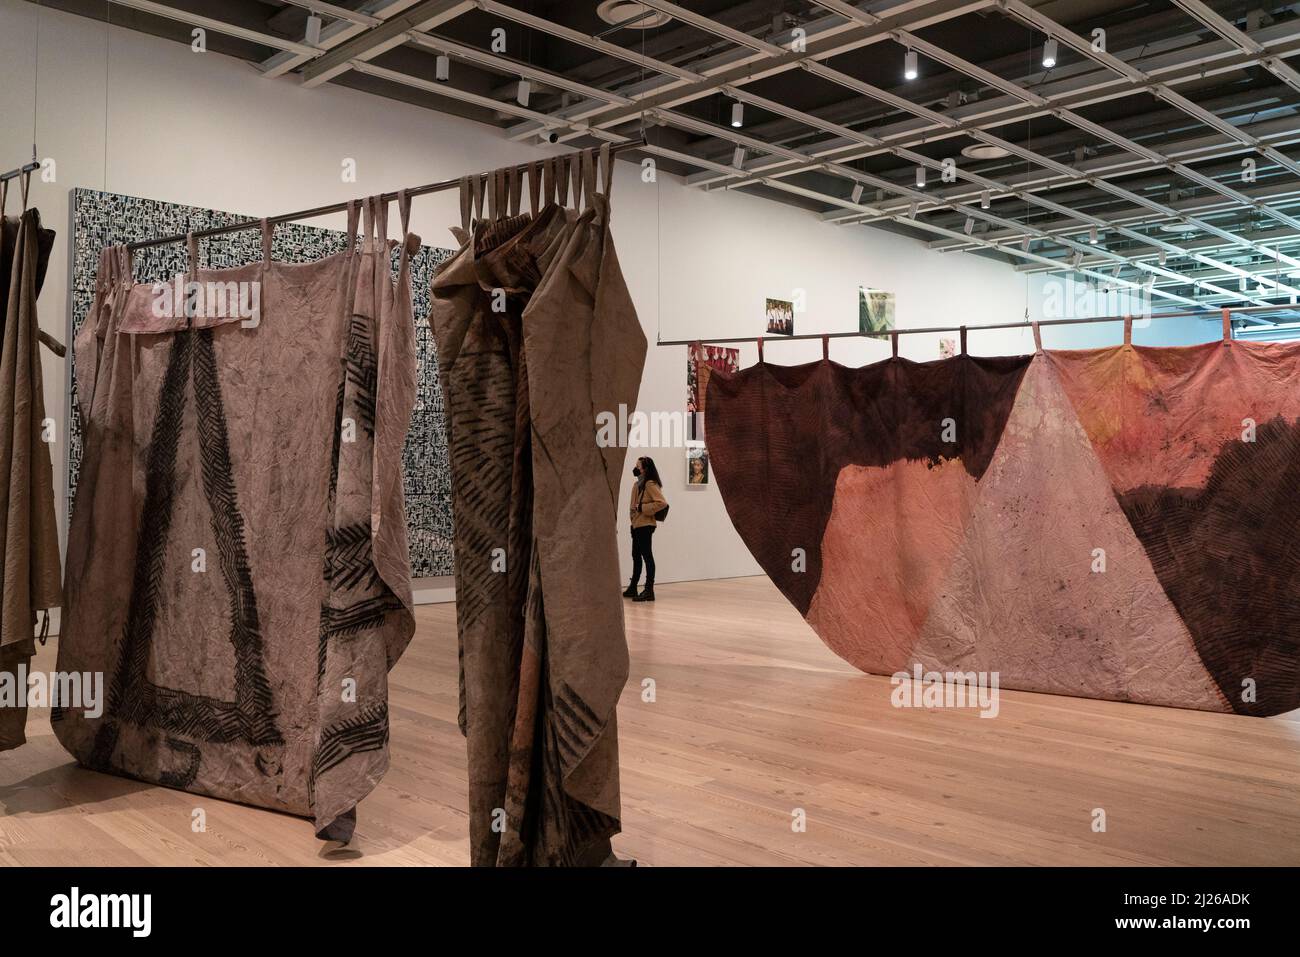 Artwork on fabric by Duane Linklater, a Canadian First Nations artist of Omaskêko Cree ancestry, is part of the Whitney Biennial 2022. Stock Photo